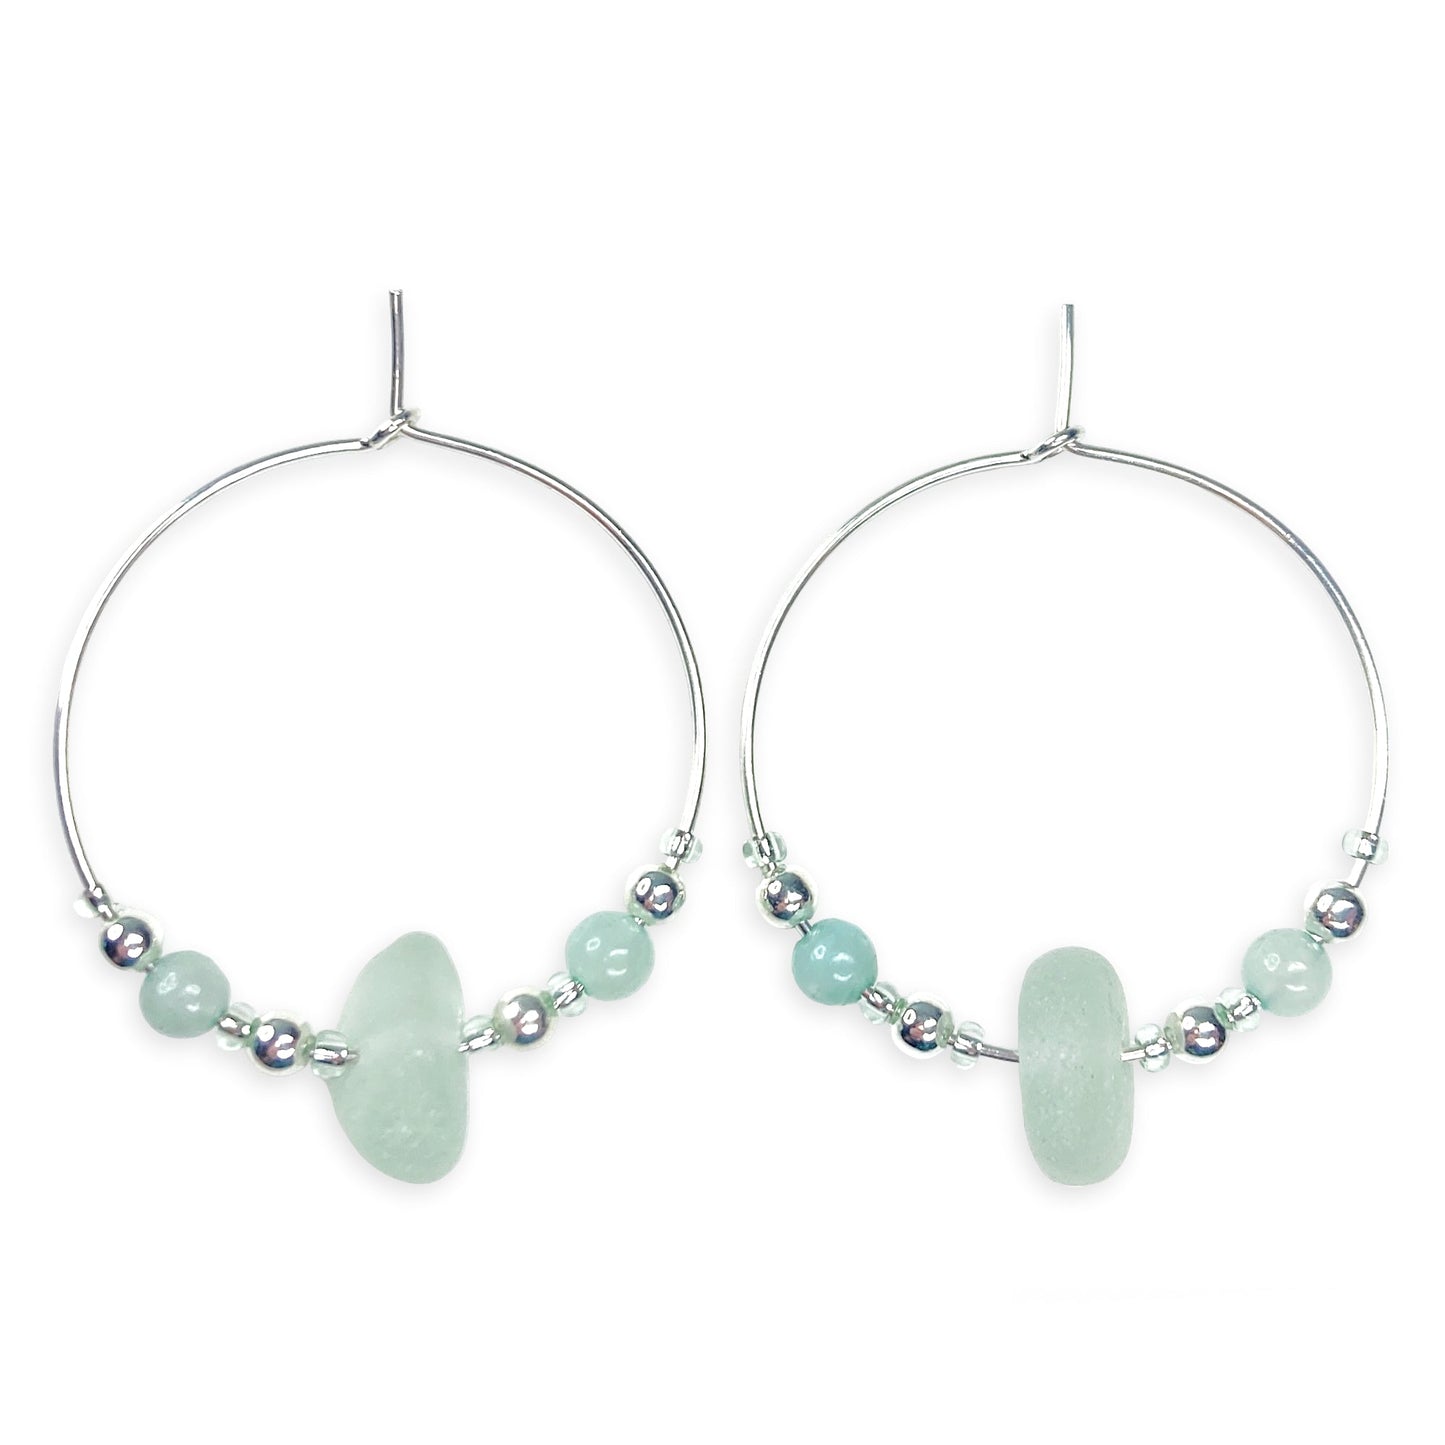 Large Green Sea Glass Hoop Earrings - 3cm - Sterling Silver with Amazonite Crystal Beads - East Neuk Beach Crafts